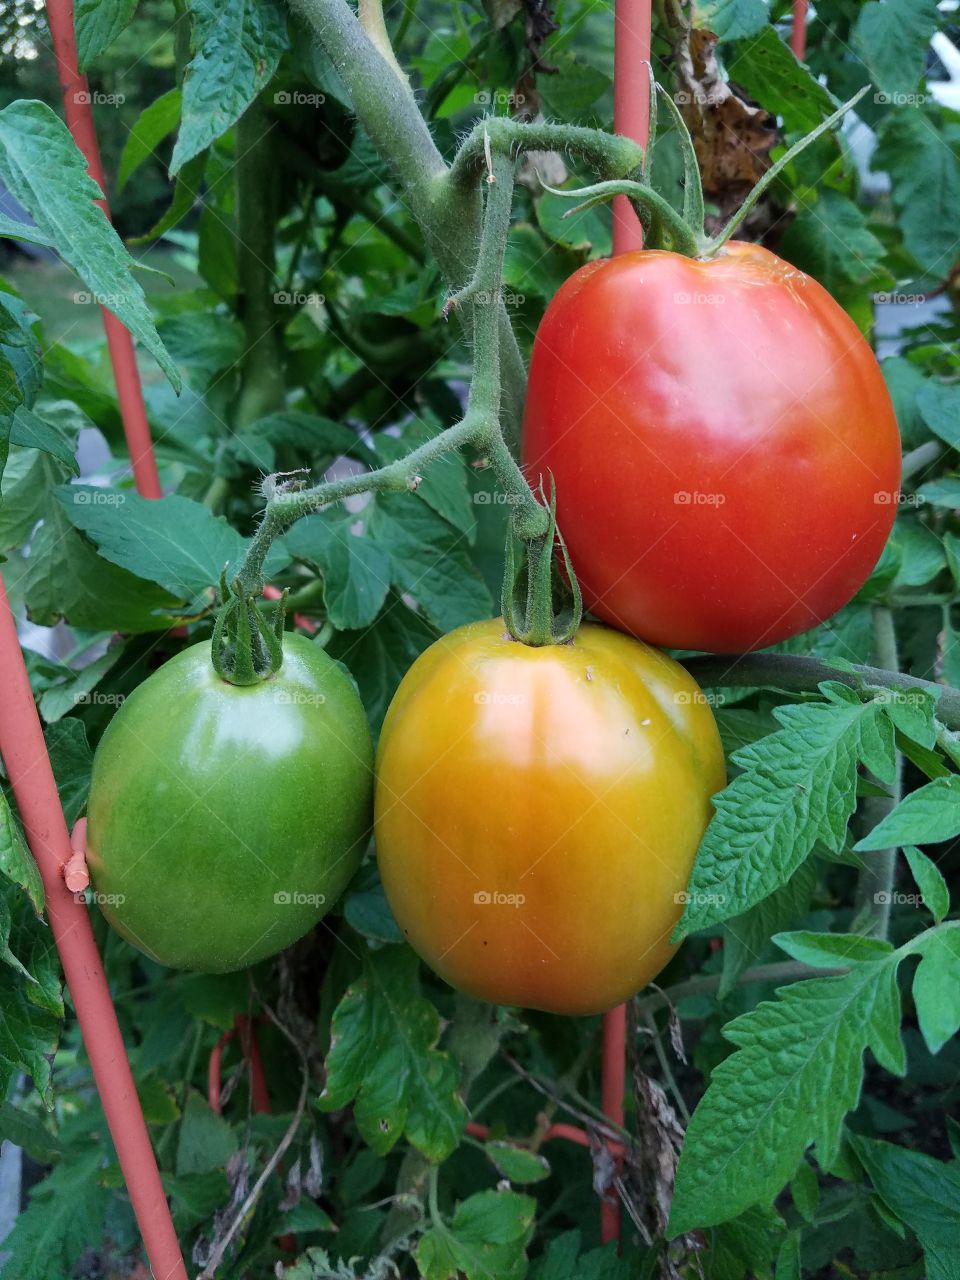 The Stages of Ripening Tomatoes